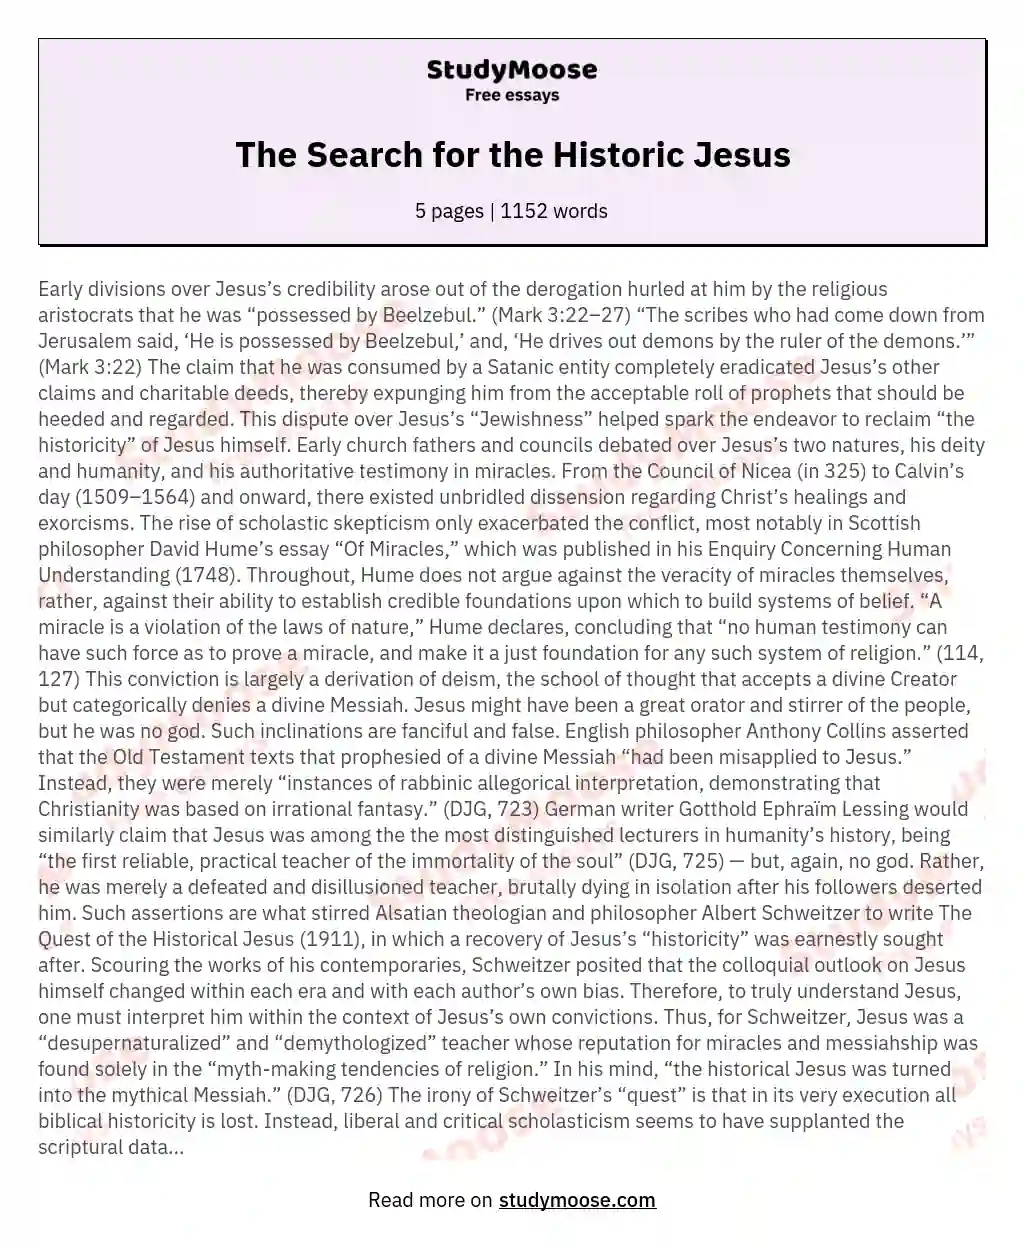 The Search for the Historic Jesus essay